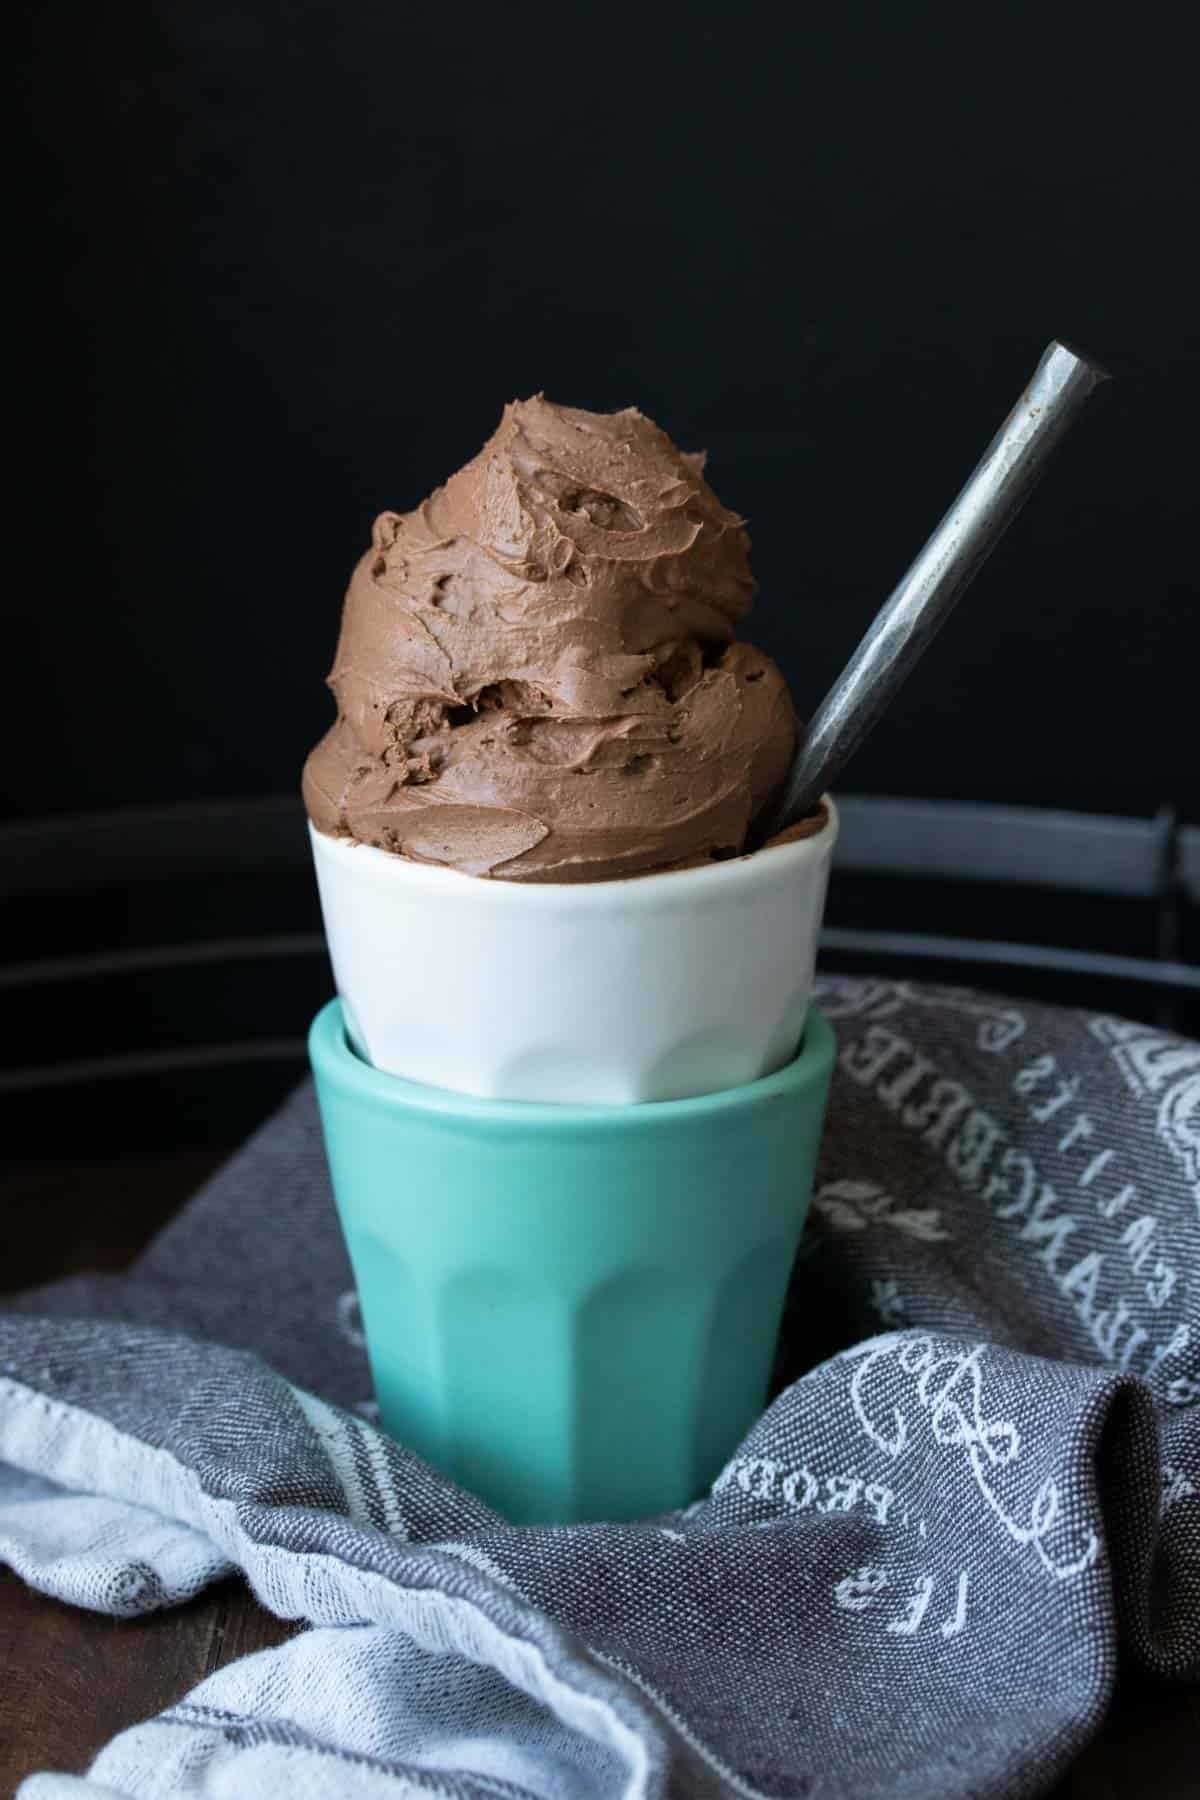 Scoops of chocolate ice cream in teal and white bowls. 